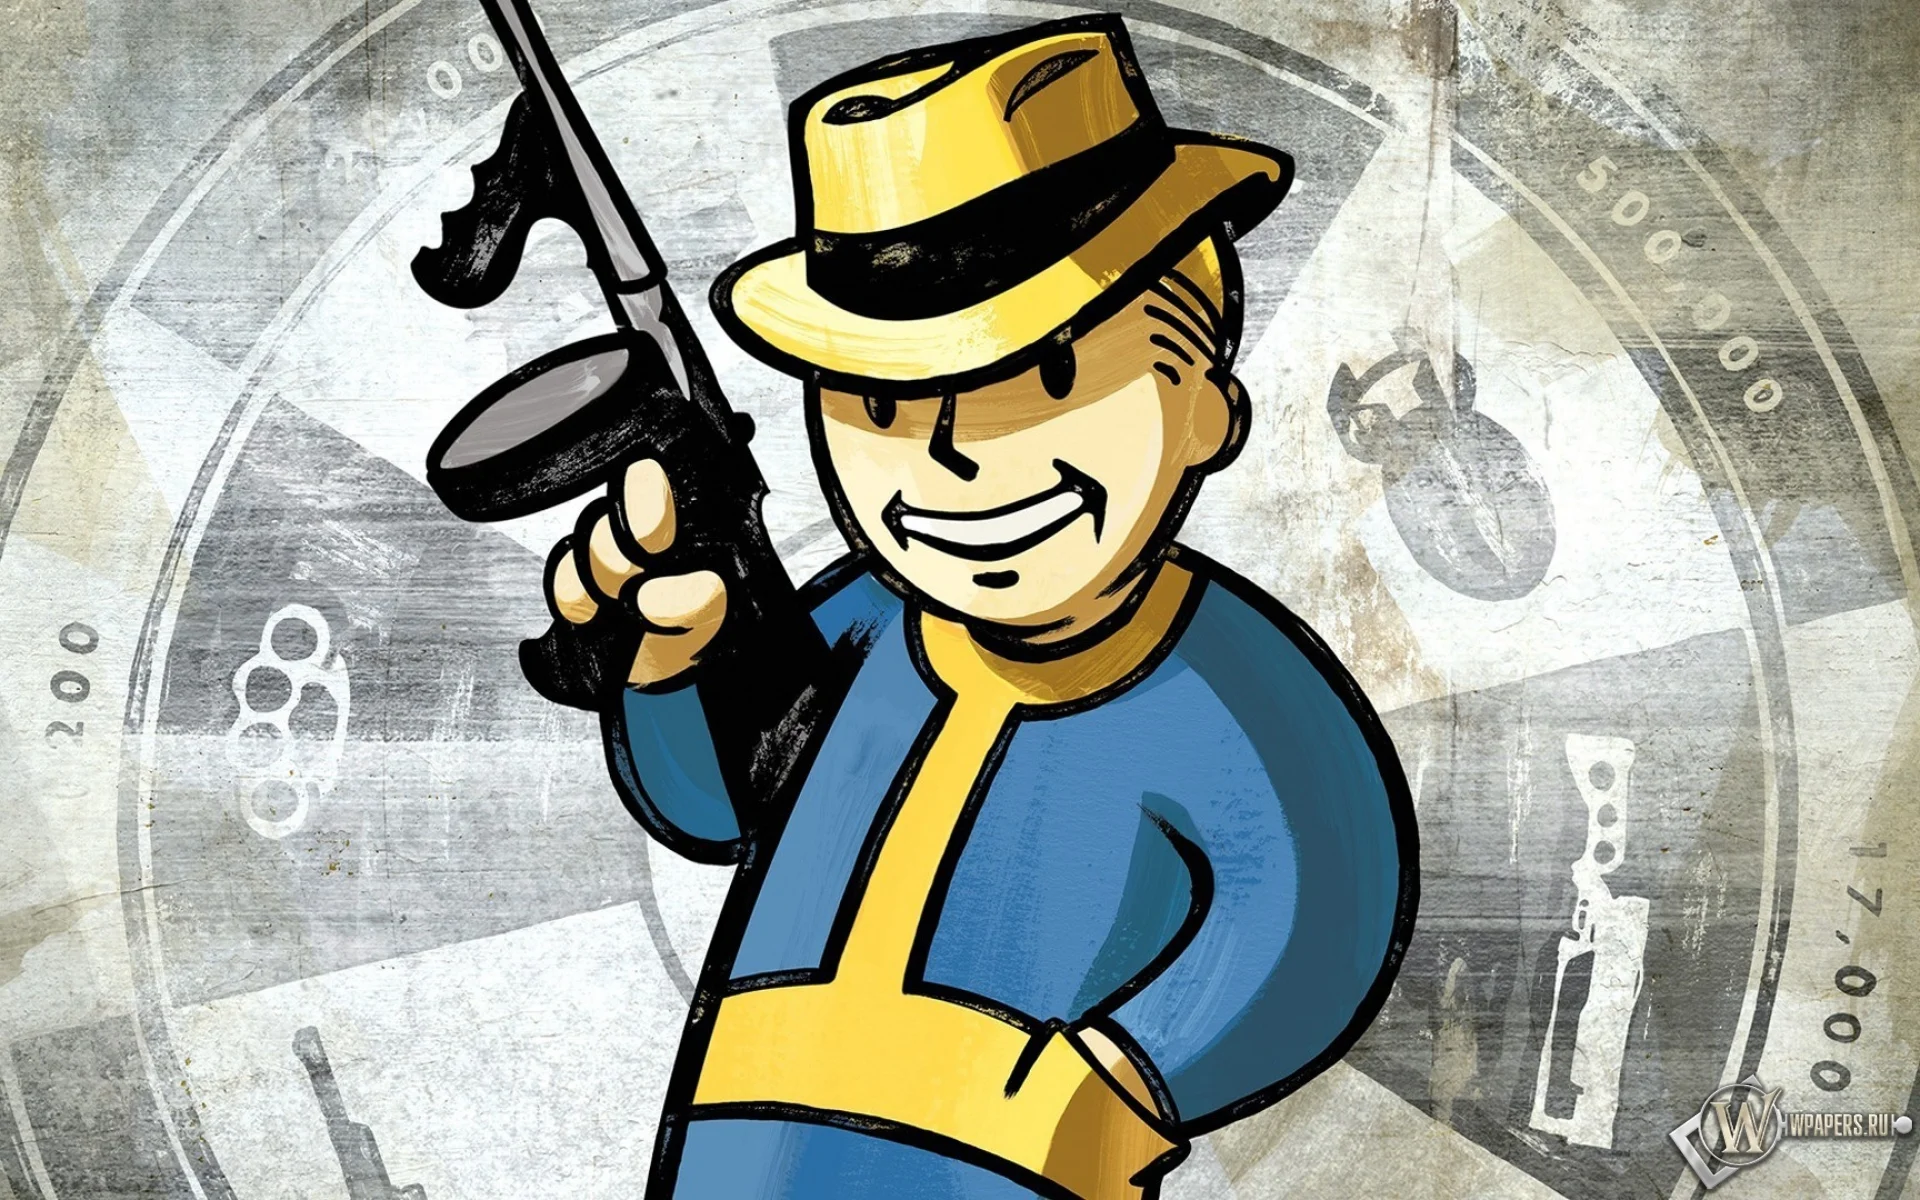 The main character of the Fallout series appeared in a new frame